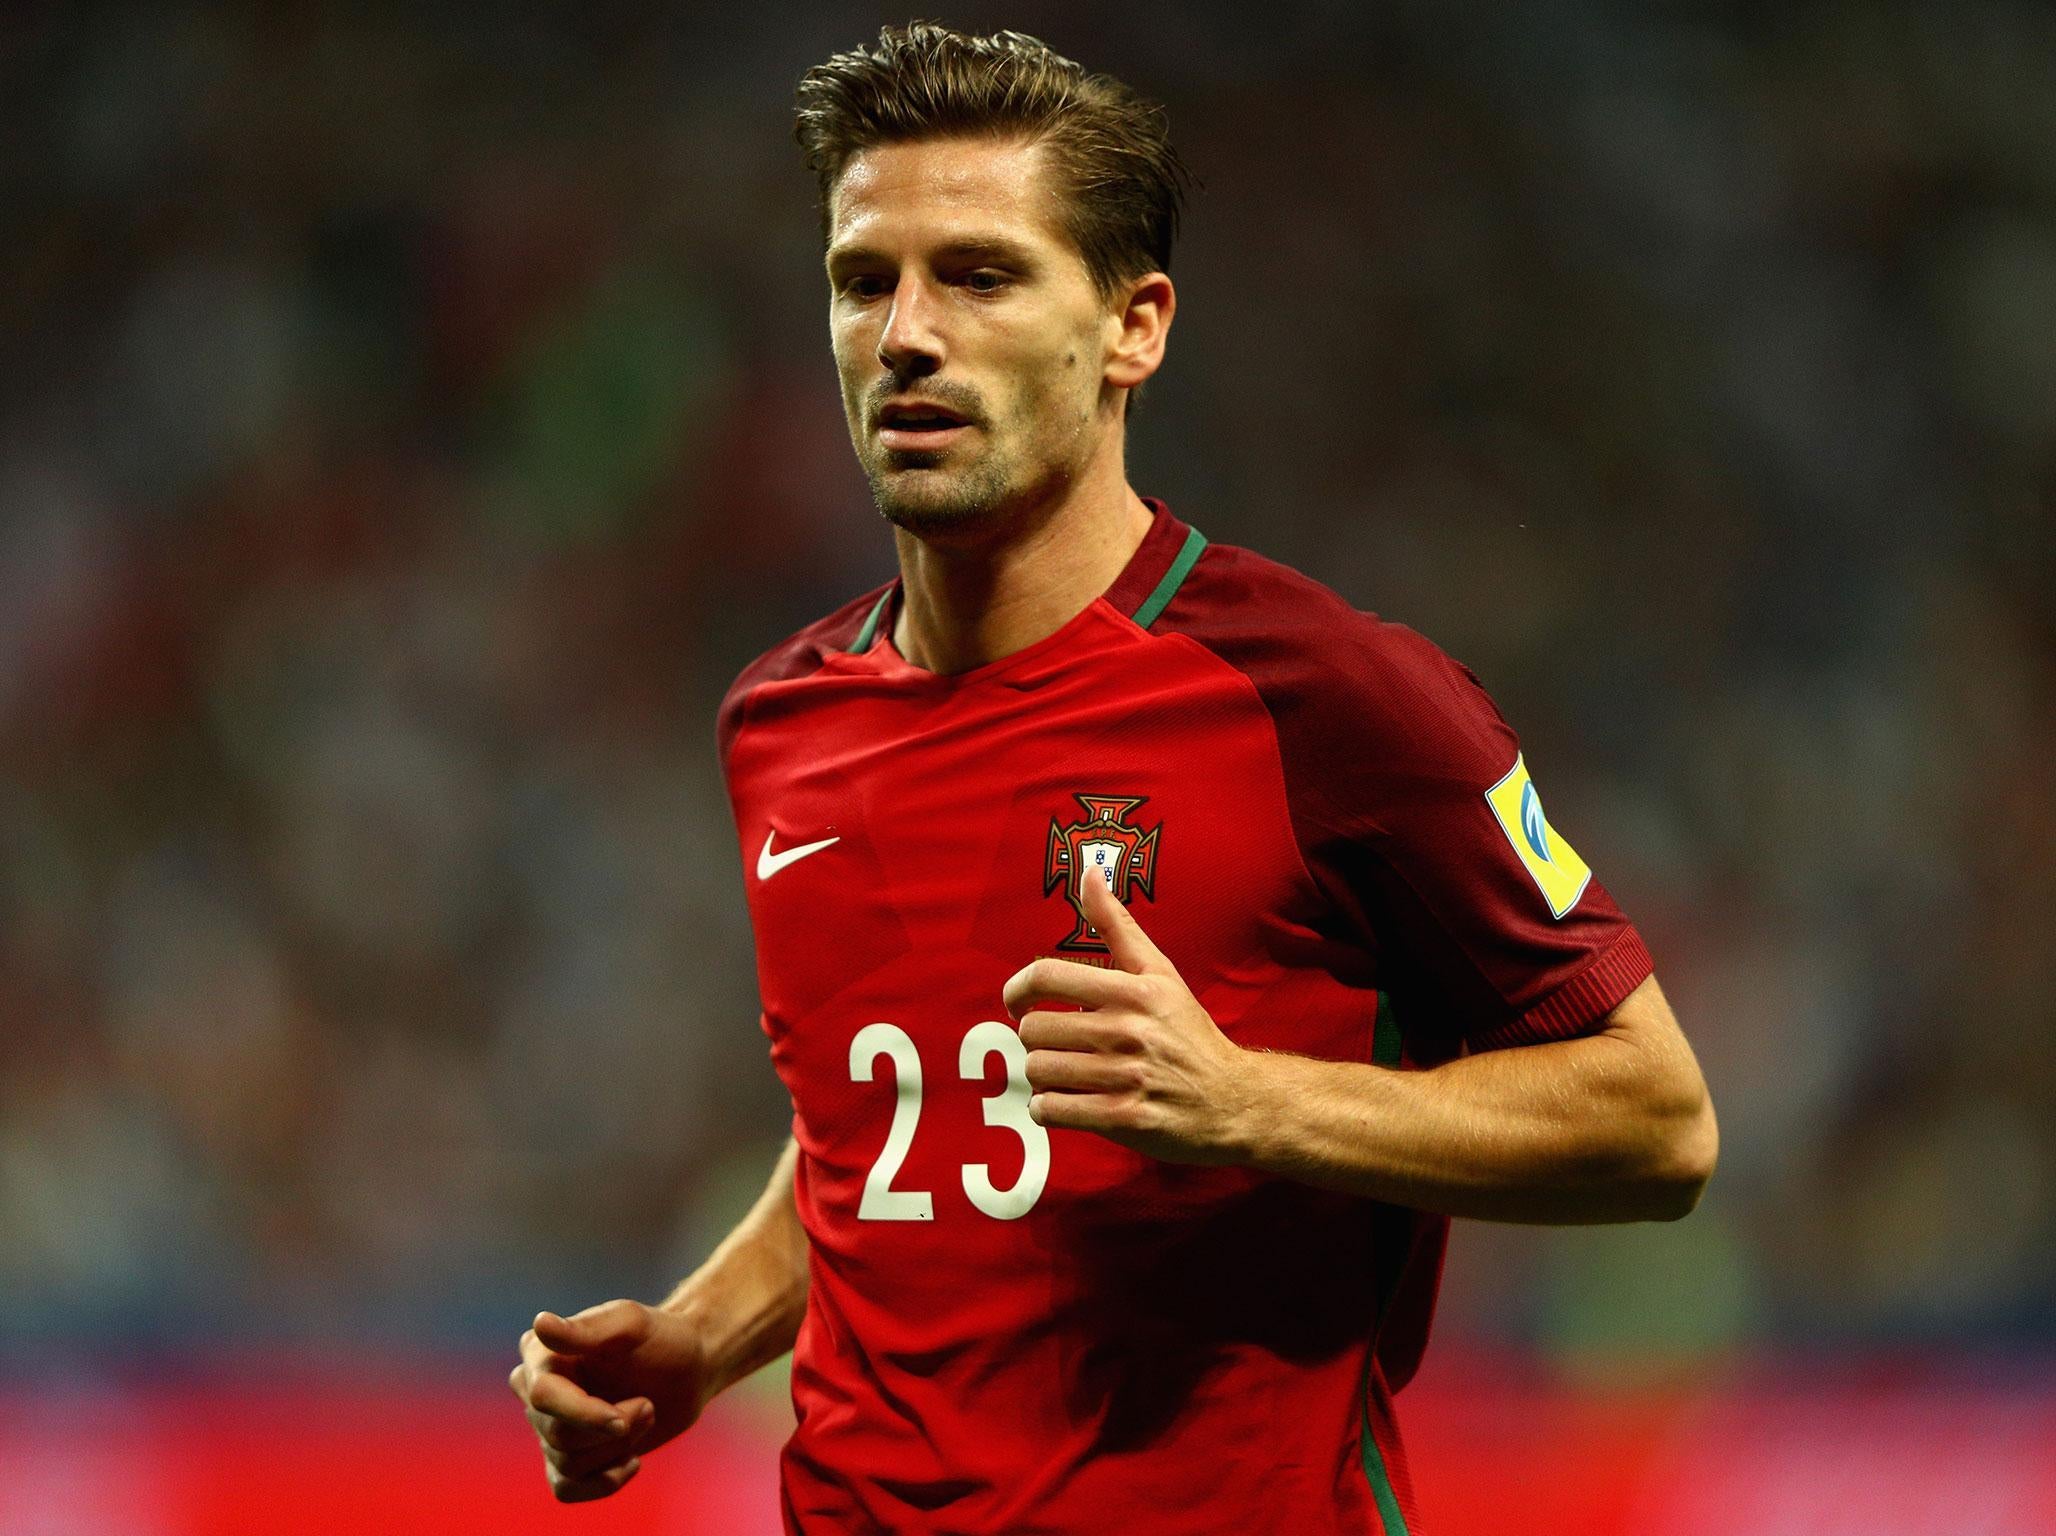 Adrien Silva is yet to play for Leicester despite signing on deadline day